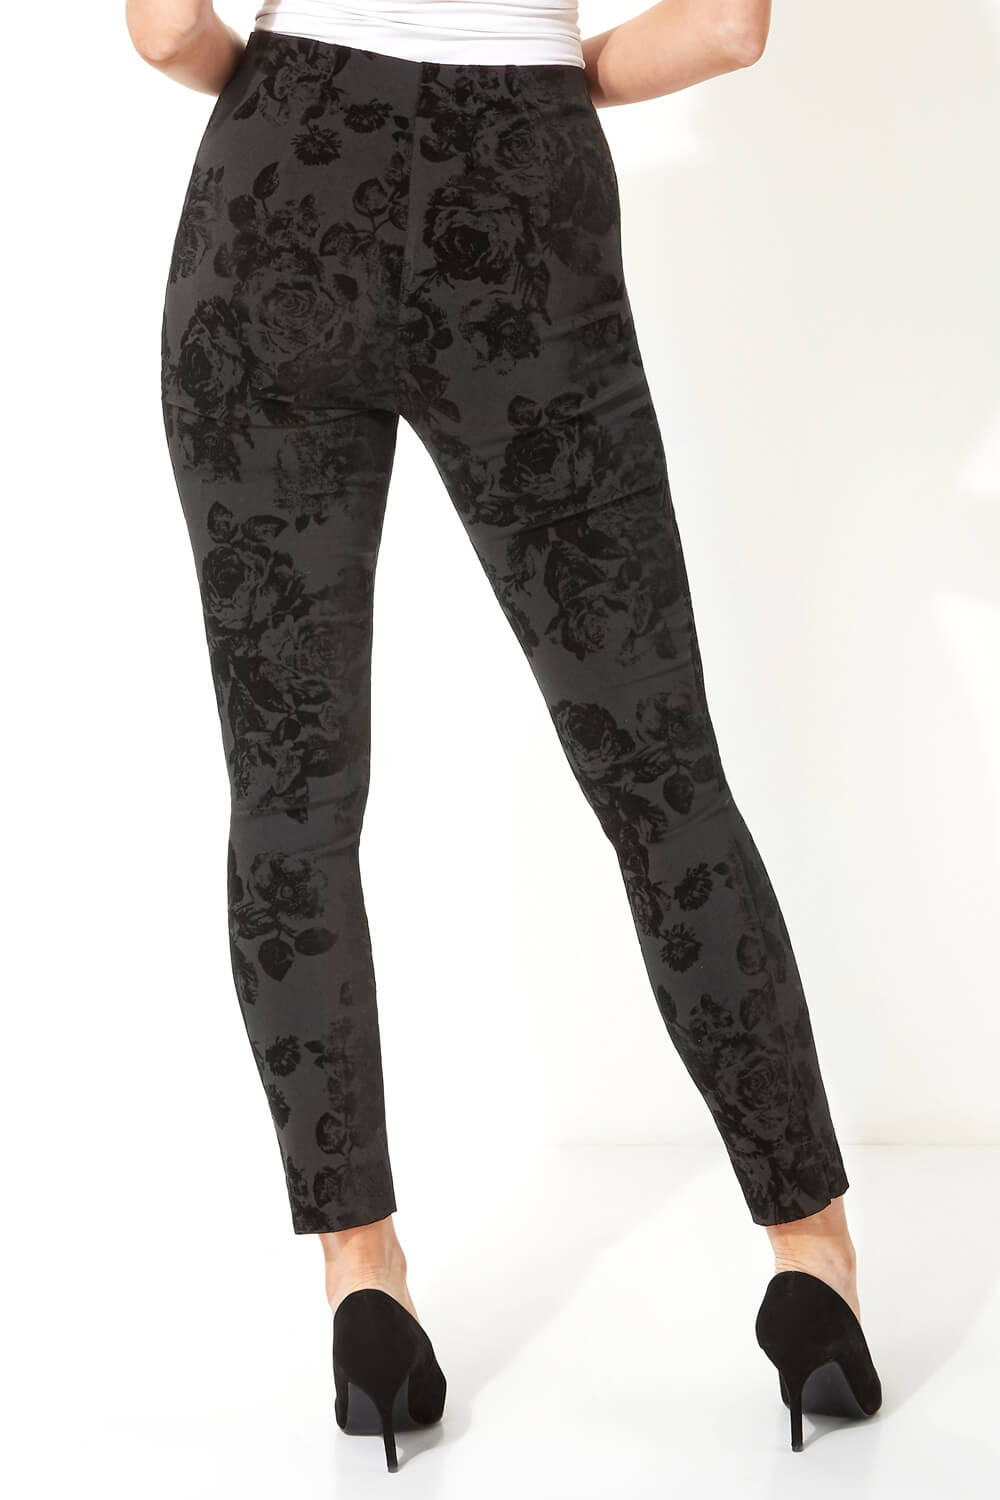 Black Flocked Full Length Stretch Trousers, Image 2 of 5